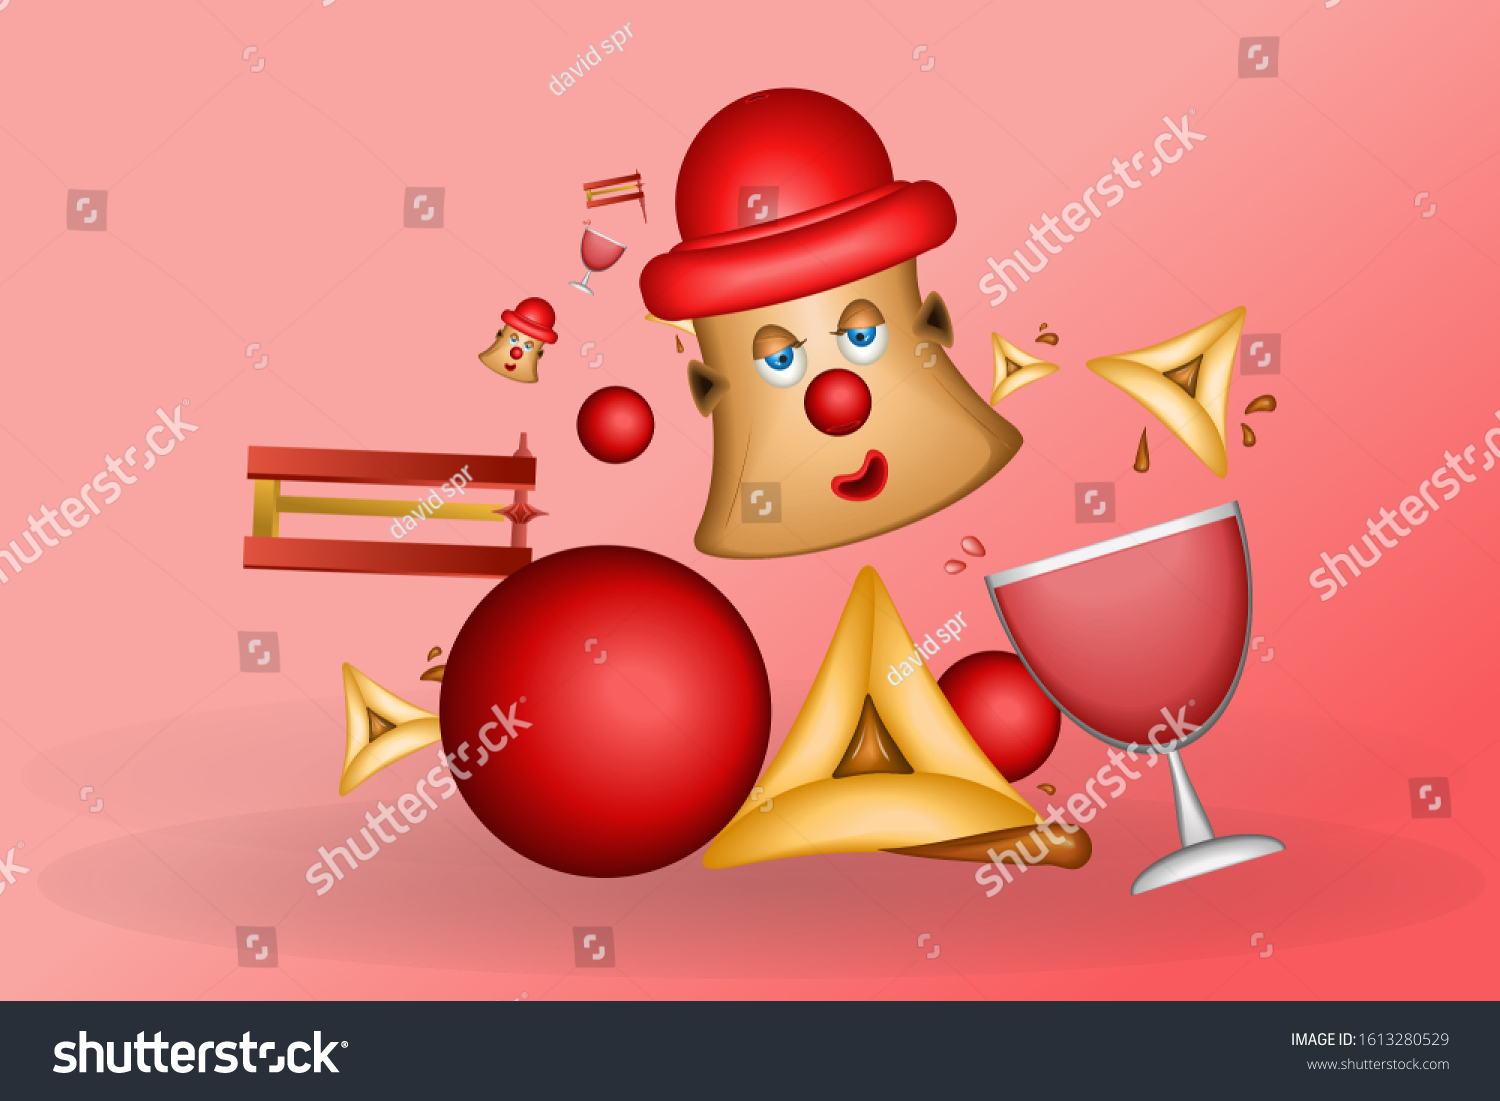 stock-vector-a-glass-of-wine-with-haman-ears-and-a-clown-for-purim-holiday-1613280529.jpg